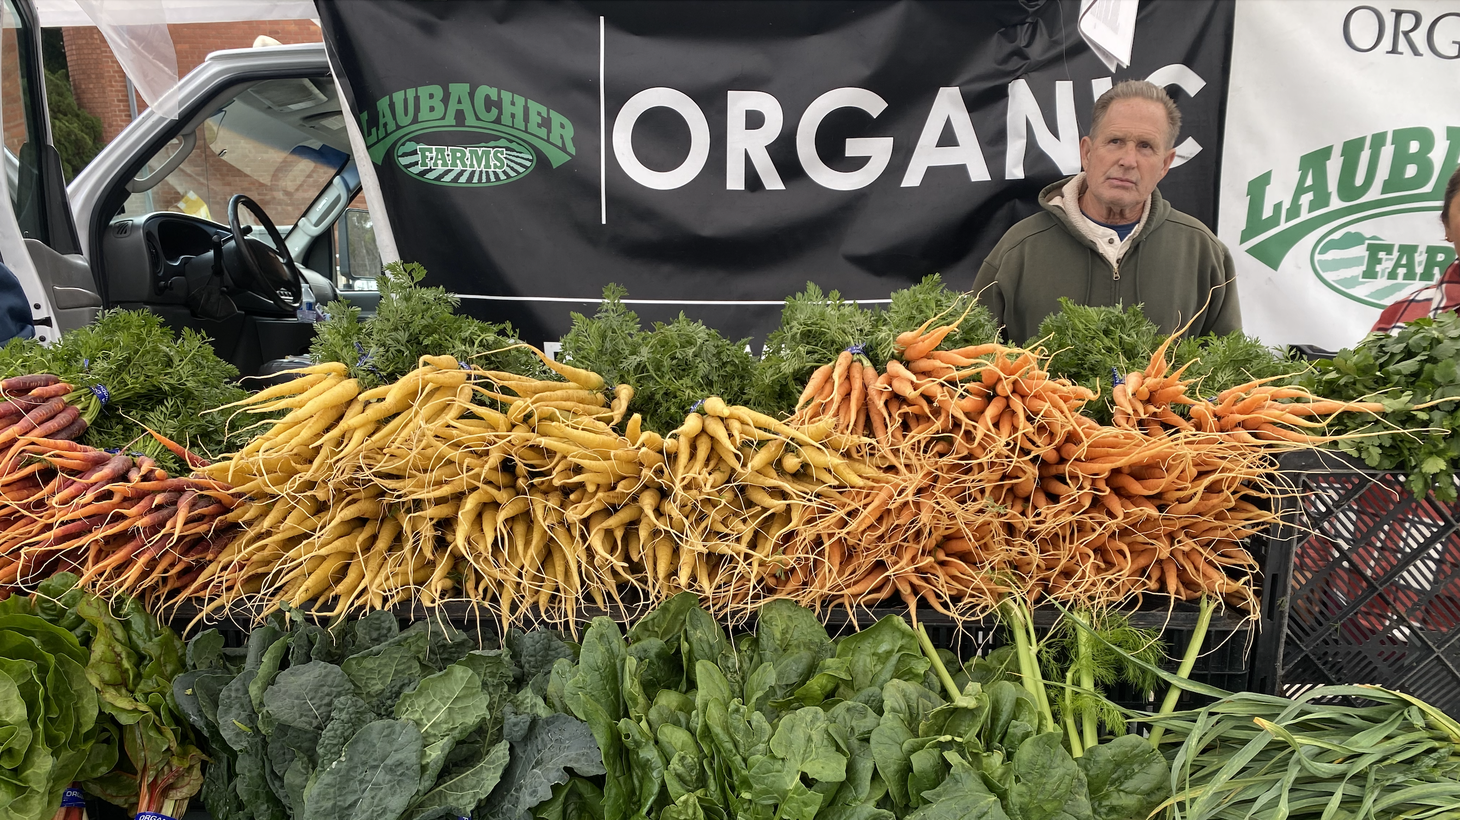 Paul Thurston of Laubacher Farms braved the extreme weather to bring his carrots to market.